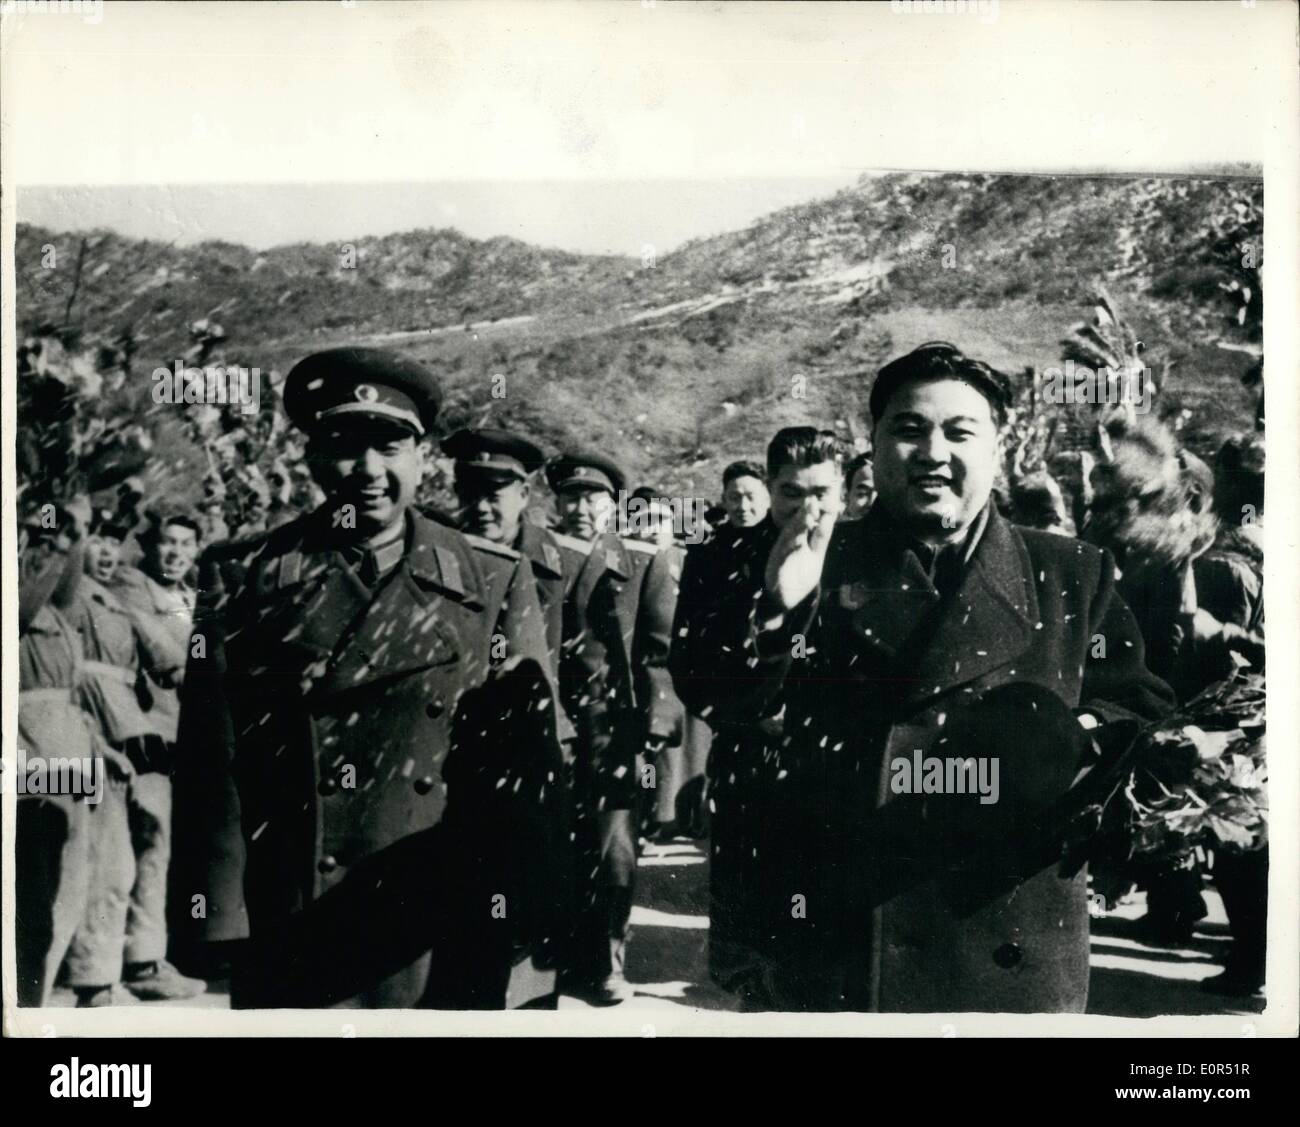 Mar. 03, 1958 - Chinese Troops leave Korea. Prime Minister Kim II Sung (right) of North Korea leads a big send - off party for this Chinese People's Volunteer Troops led by General Yang Yung, Commander of the Communist army (left) , prior to the beginning of the mass evacuation of Chinese troops from North Korea recently. Stock Photo